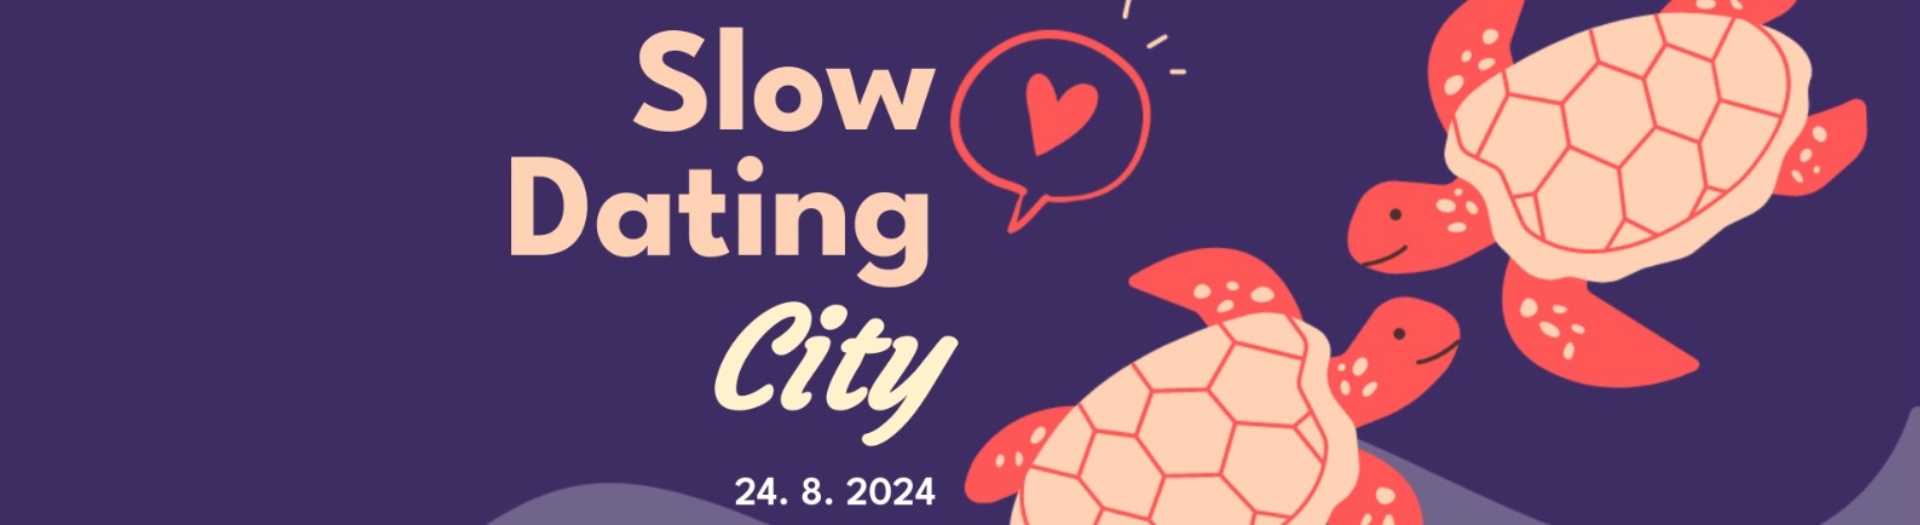 Slow Dating City